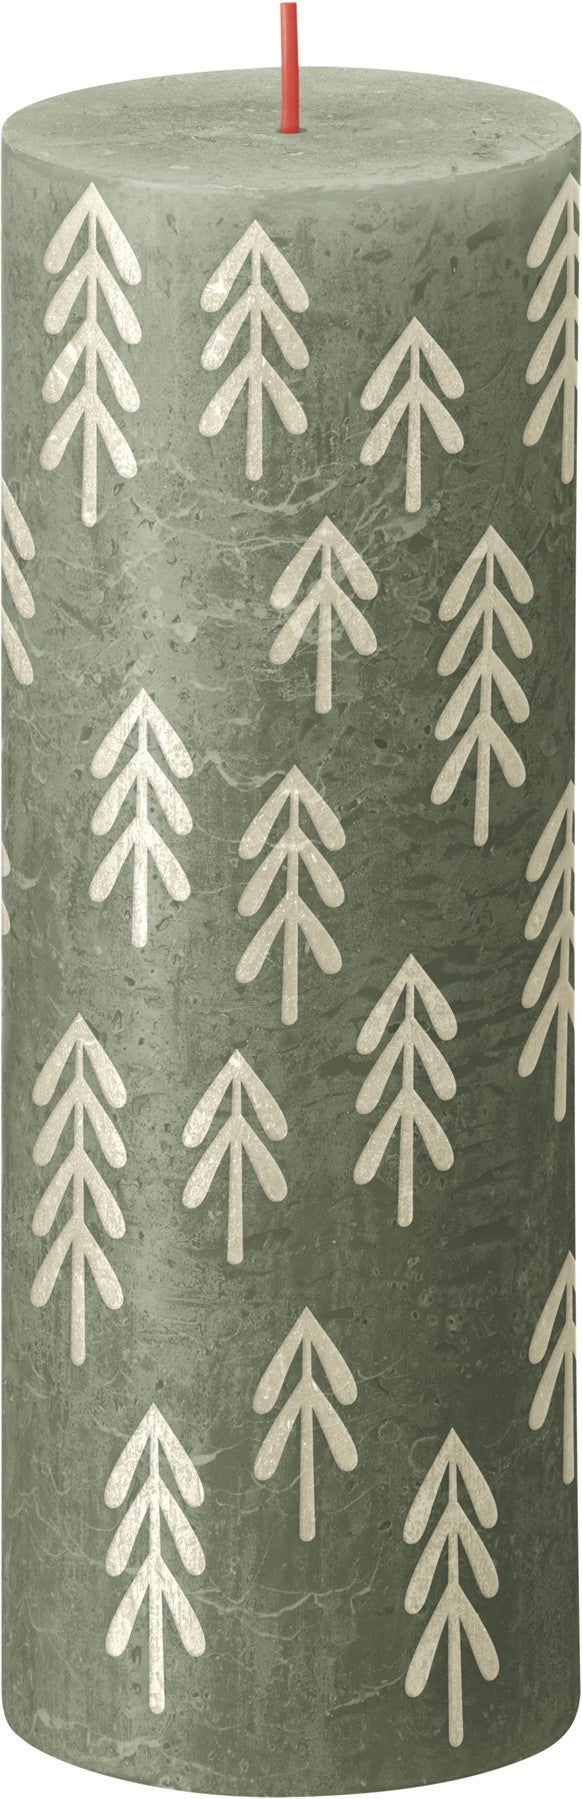 View Bolsius Rustic Fresh Olive Silhouette Pillar Candle with Tree 190mm x 68mm information